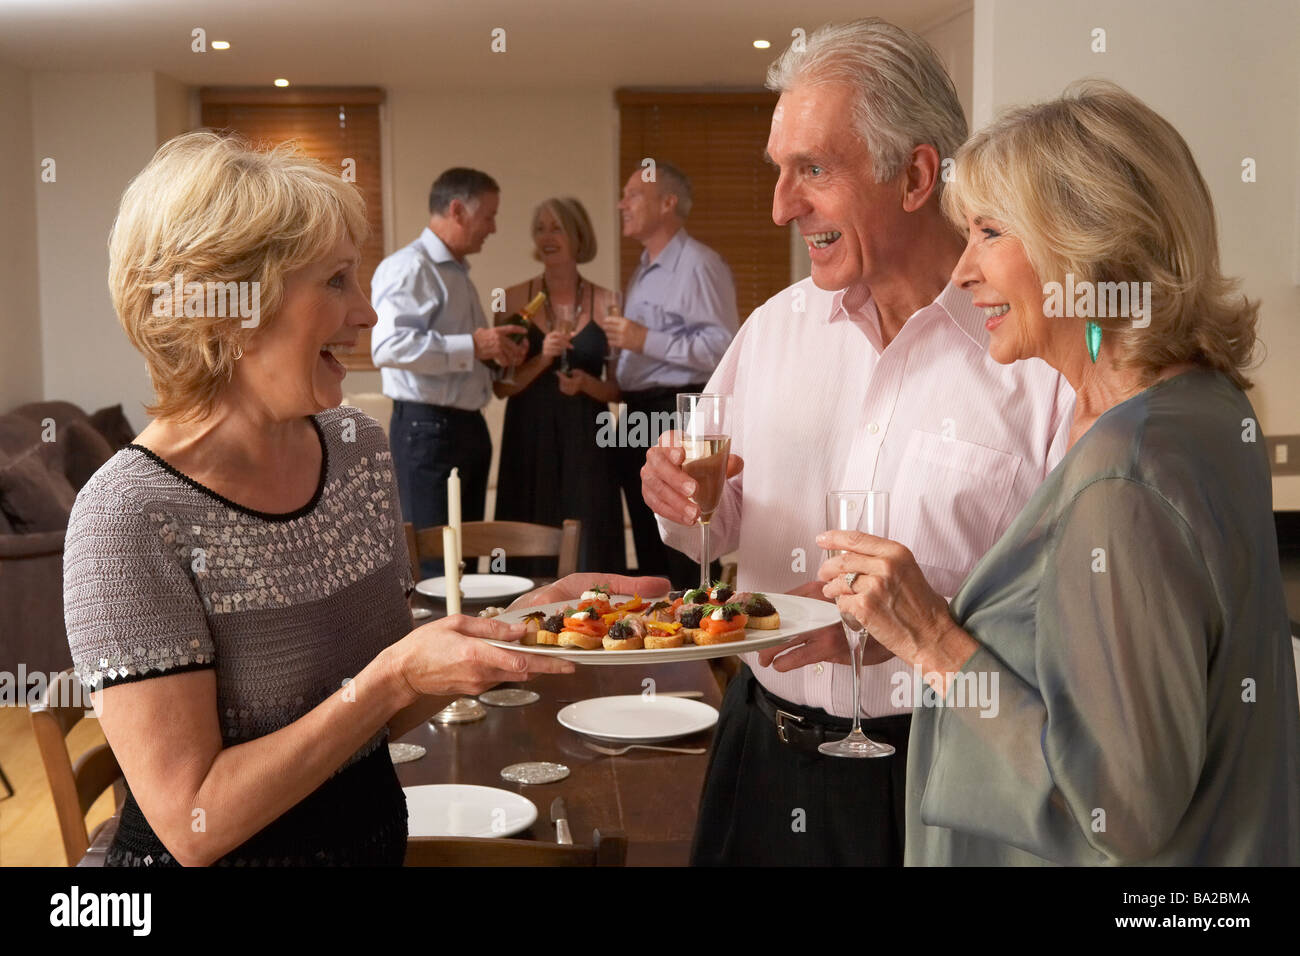 Woman Serving Hors D'oeuvres To Her Guests At A Dinner Party Stock Photo